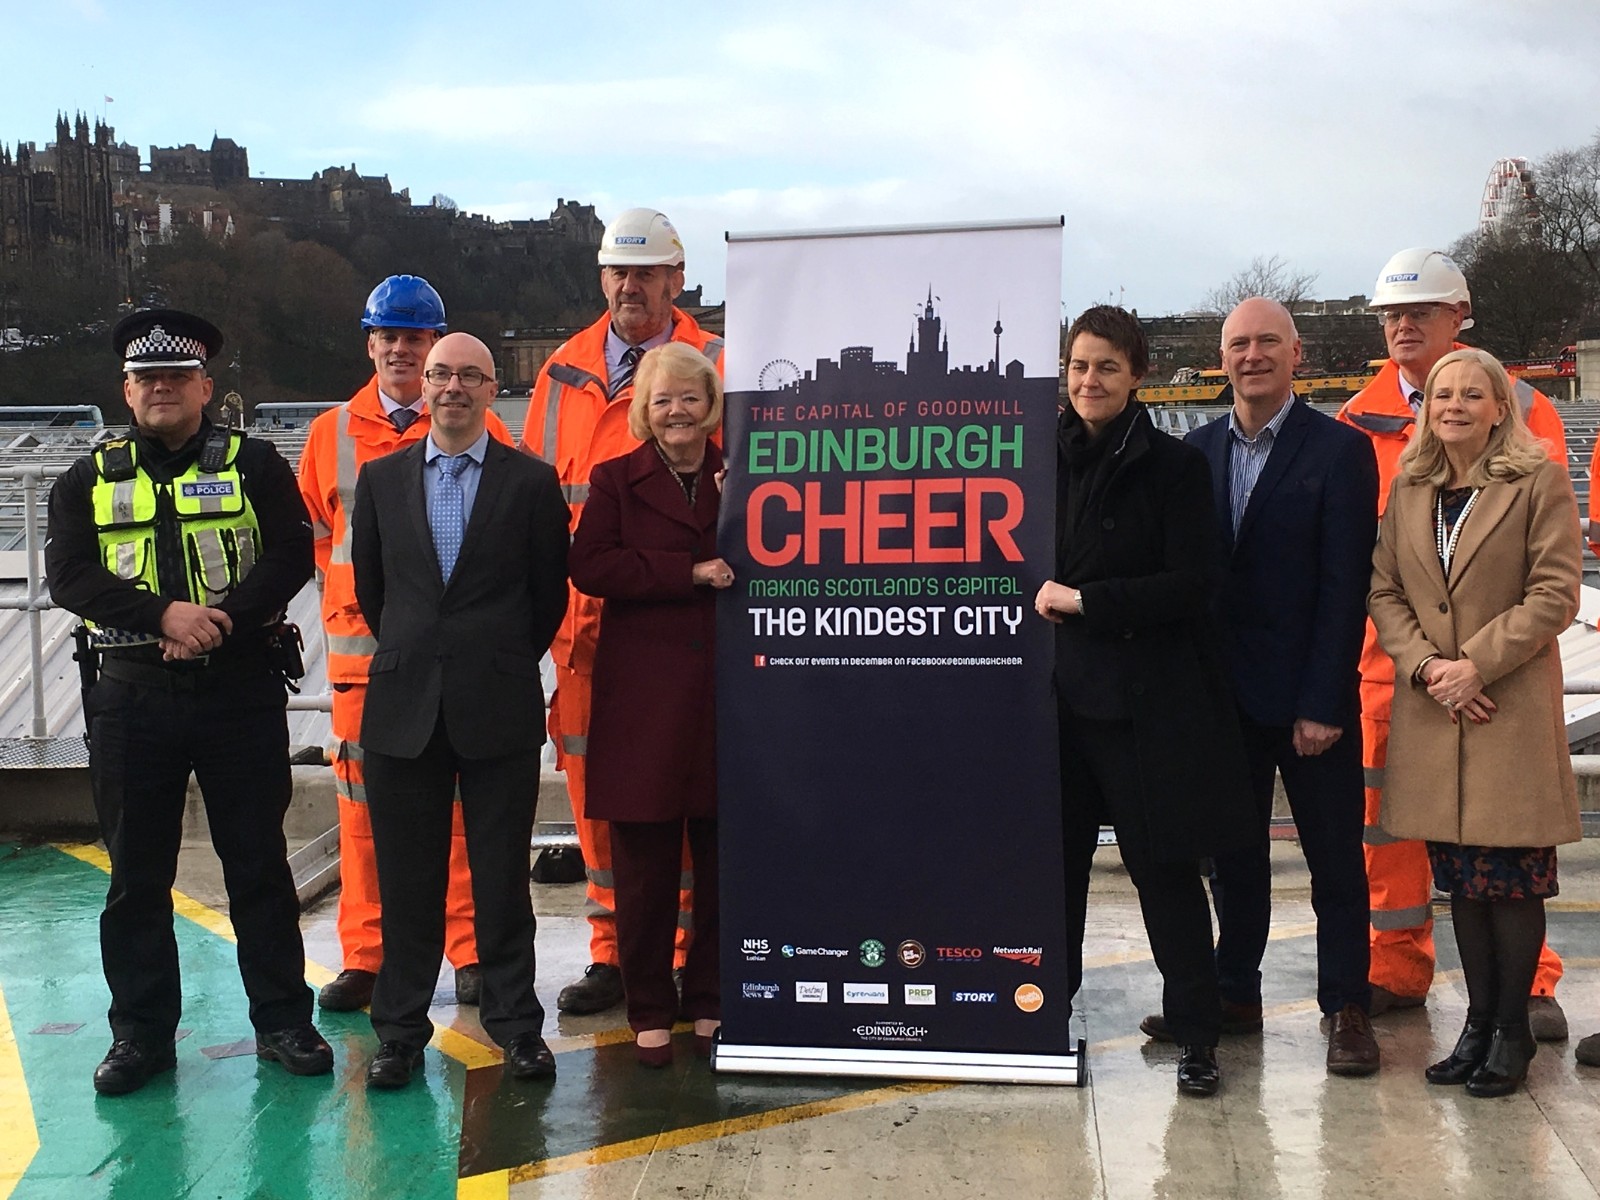  » Big Hearts leading Edinburgh Cheer campaign for the 2nd year!